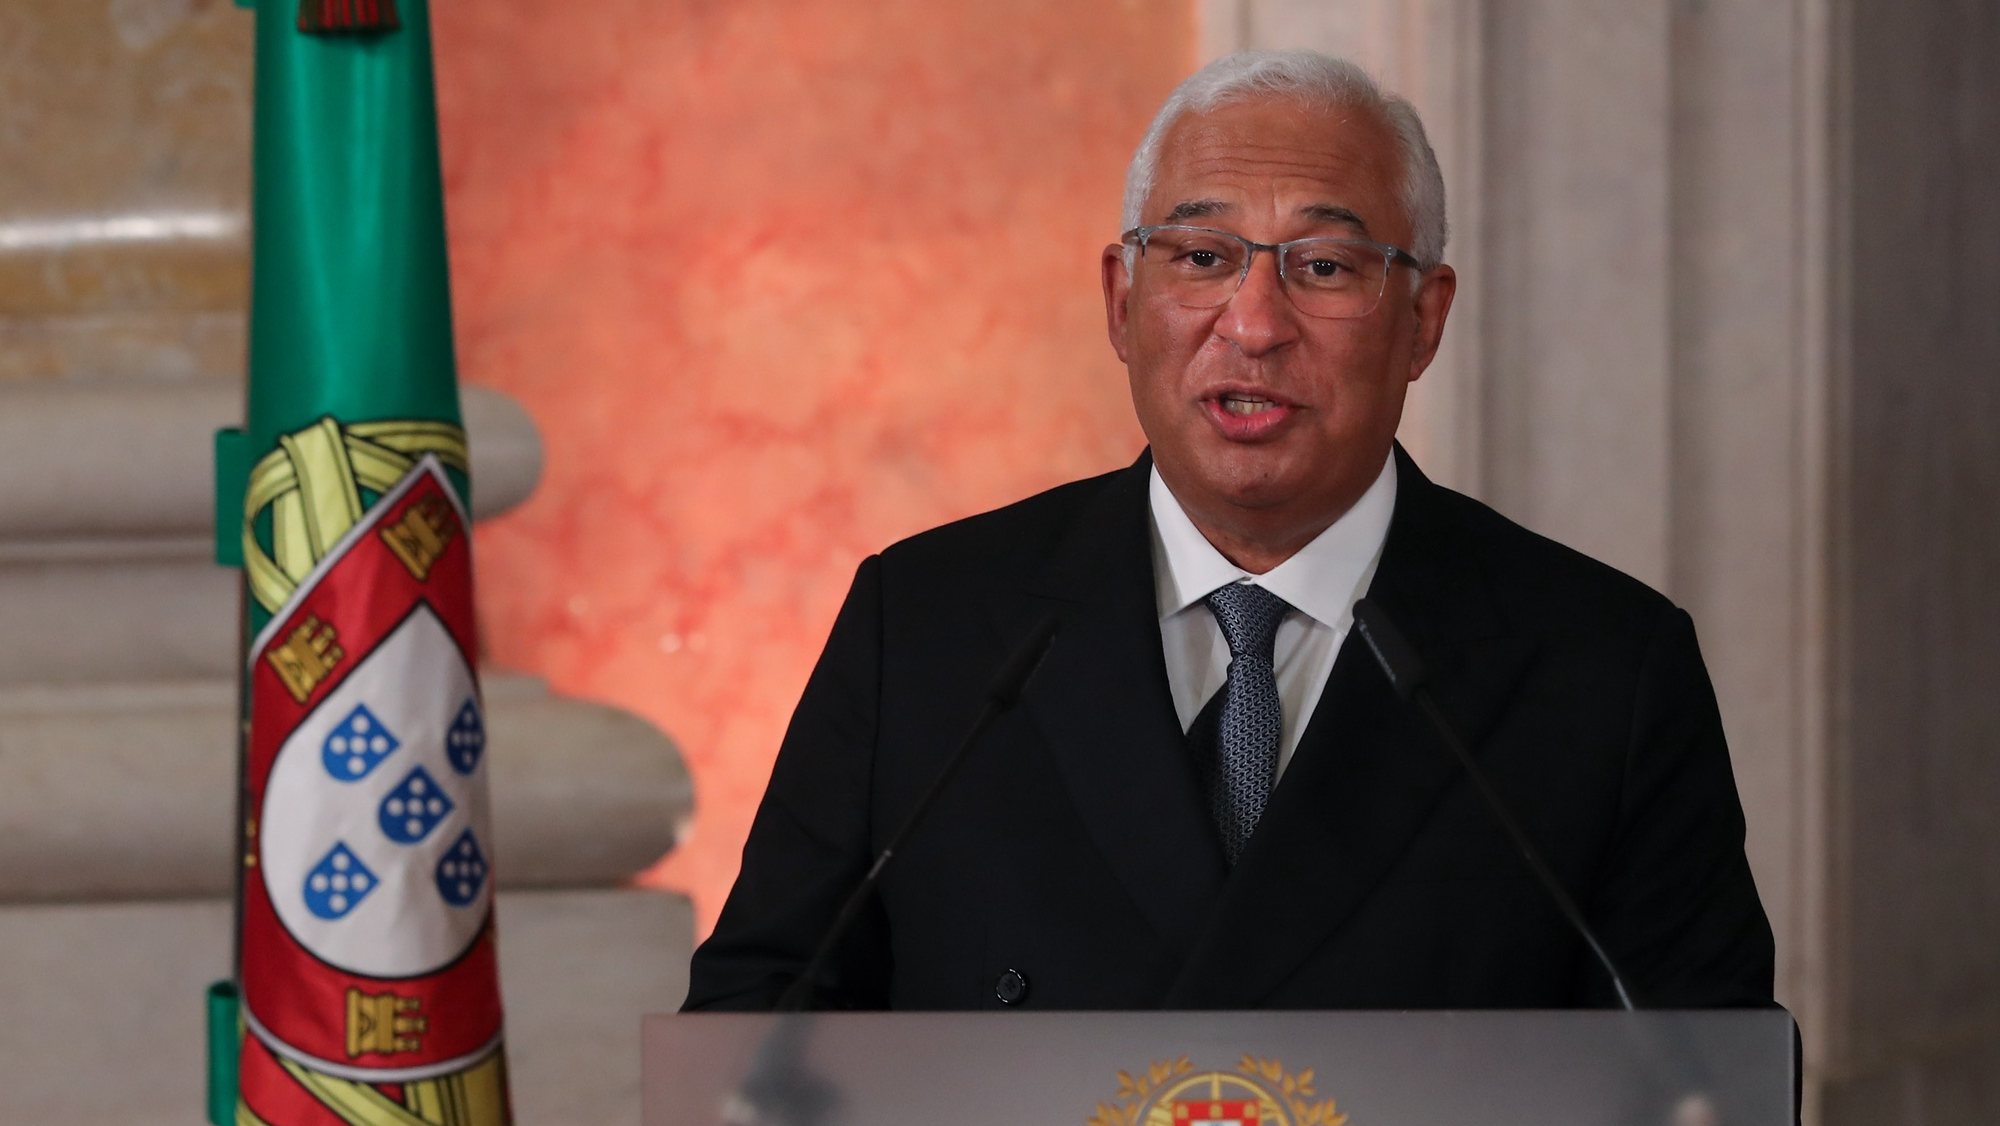 The secretary-general of Portuguese Socialist Party and the Prime-Minister, Antonio Costa, delivers a speech during the swearing in cerimony of the XXIII Constititional Government held at Ajuda Palace, Lisbon, Portugal, 30th March 2022. This is the third government headed by Antonio Costa, after winning the January 30 legislative elections with an absolute majority. MIGUEL A. LOPES/LUSA